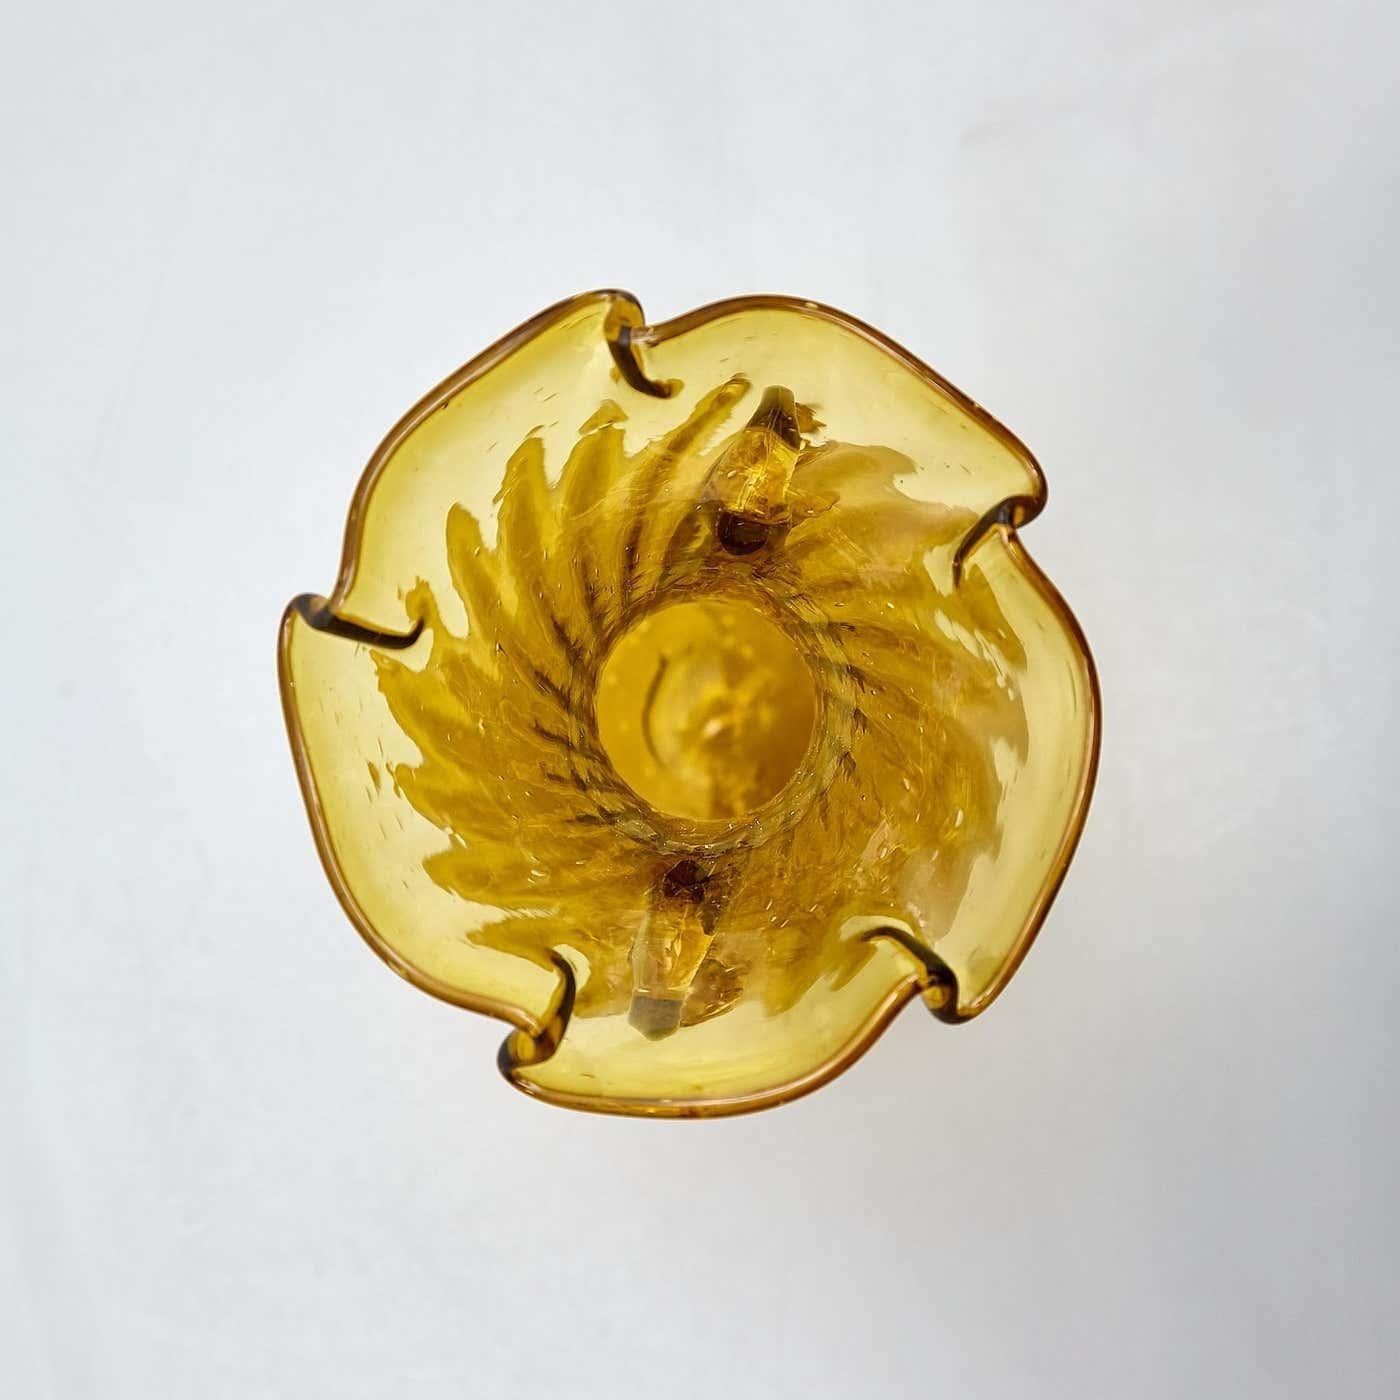 Extraordinary Yellow Blown Glass Vase - Early 20th Century For Sale 2